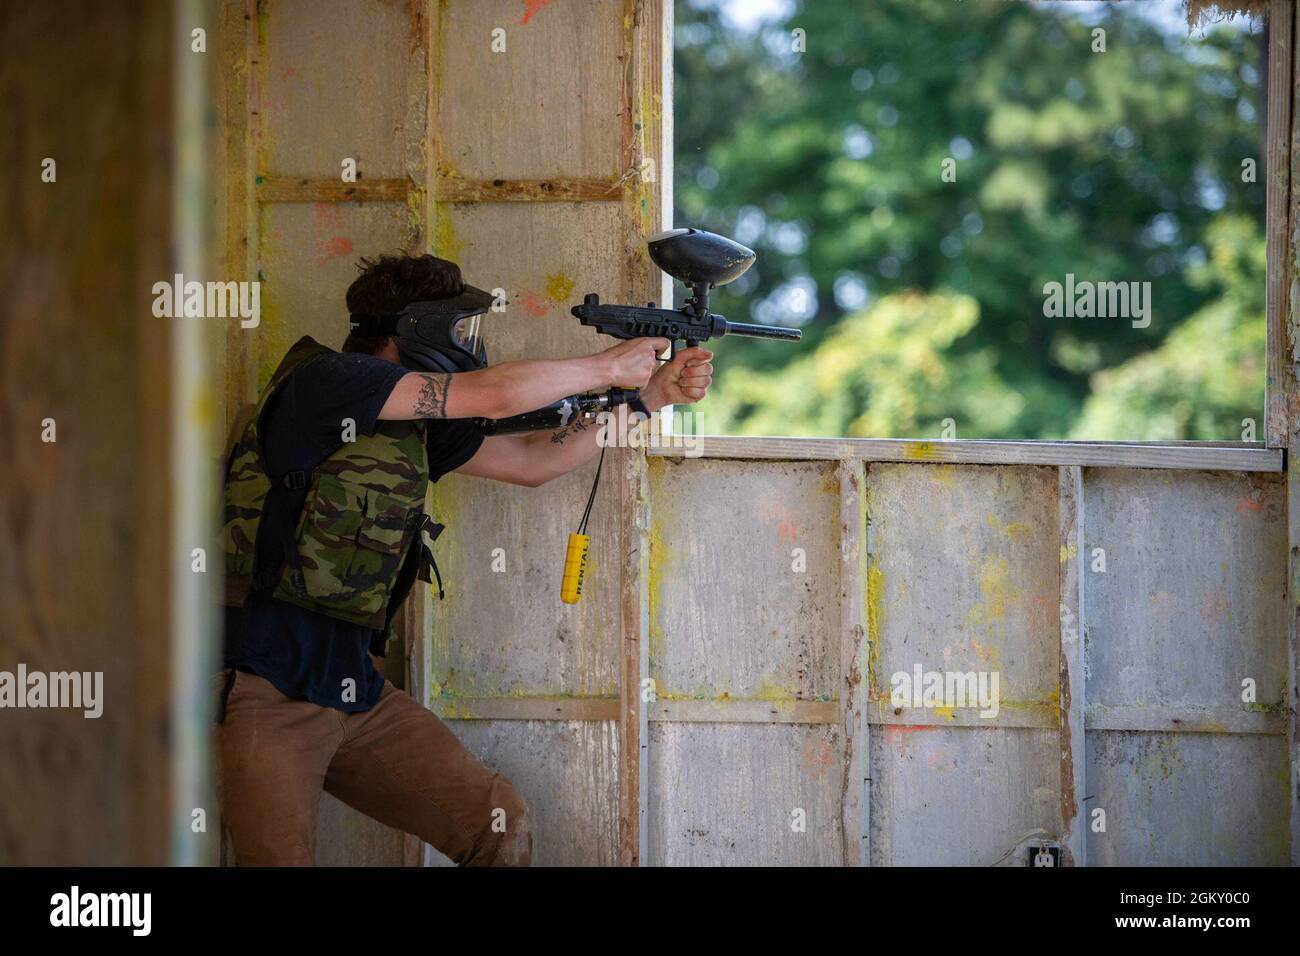 U.S. Navy Logistics Specialist 3rd Class Bailey Stephenson, from Longmont, Colorado, assigned to the aircraft carrier USS John C. Stennis (CVN 74), fires a paintball marker through the window on a paintball field during a Morale, Welfare, and Recreation event, in Hampton, Virginia, July 22, 2021. John C. Stennis is in Newport News Shipyard working alongside NNS, NAVSEA and contractors conducting Refueling and Complex Overhaul as part of the mission to deliver the warship back in the fight, on time and on budget, to resume its duty of defending the United States. Stock Photo